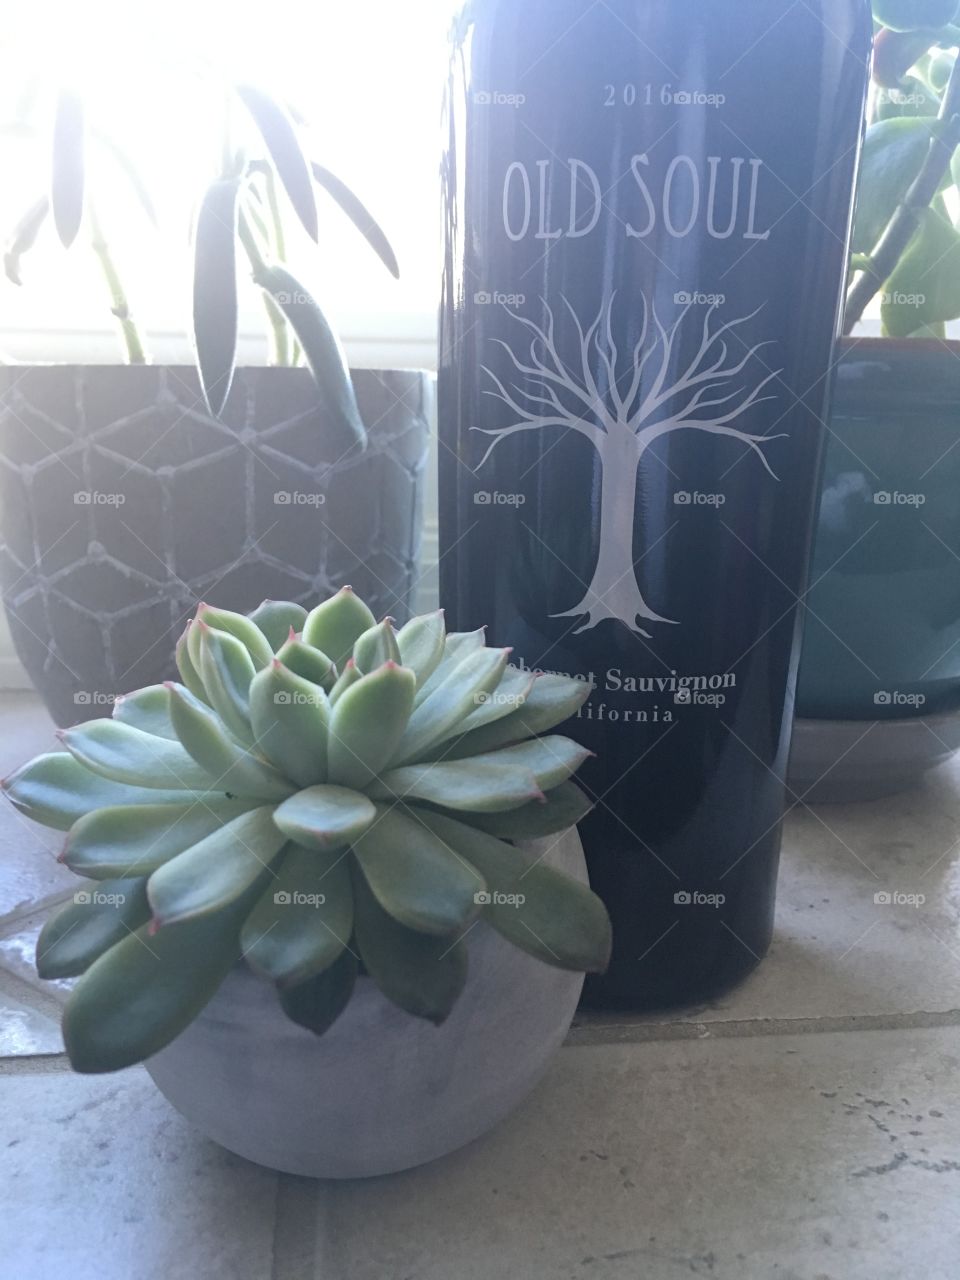 Sweet wine and plant